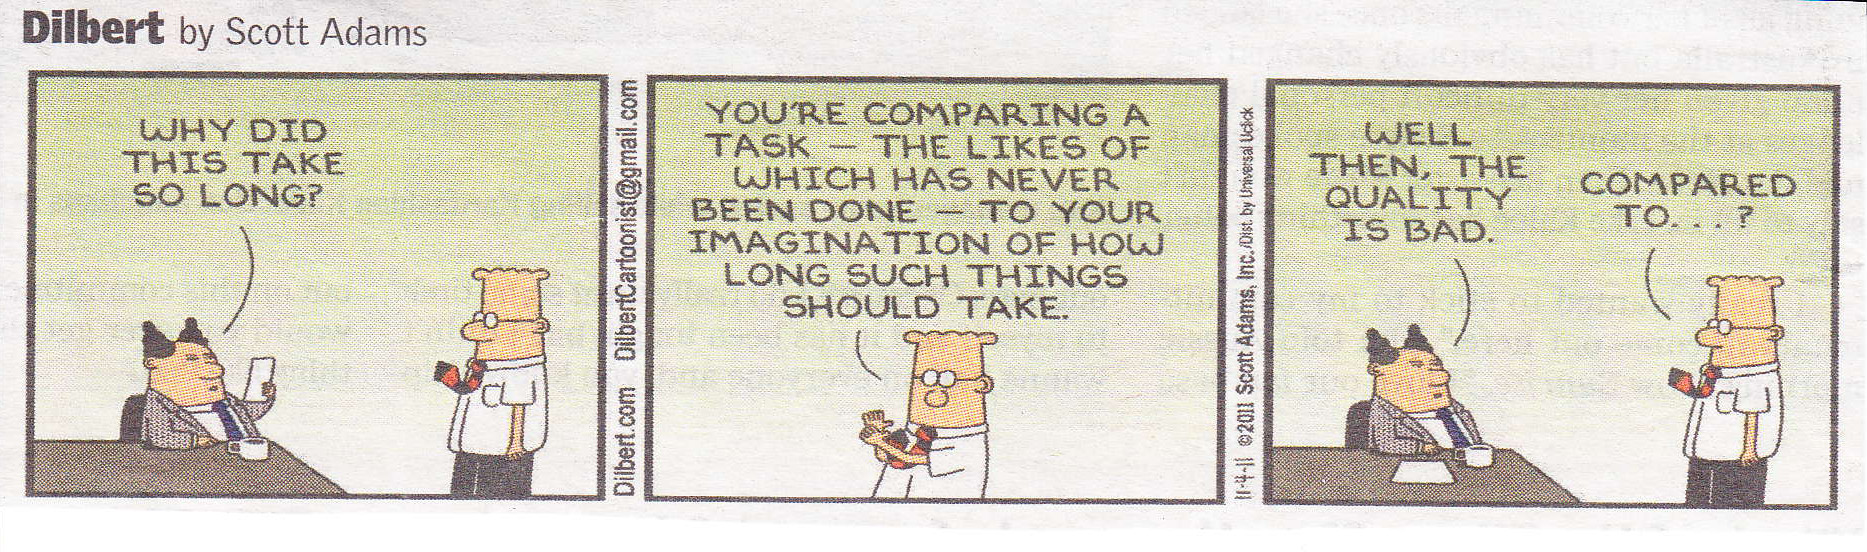 Dilbert Engineer Quotes.